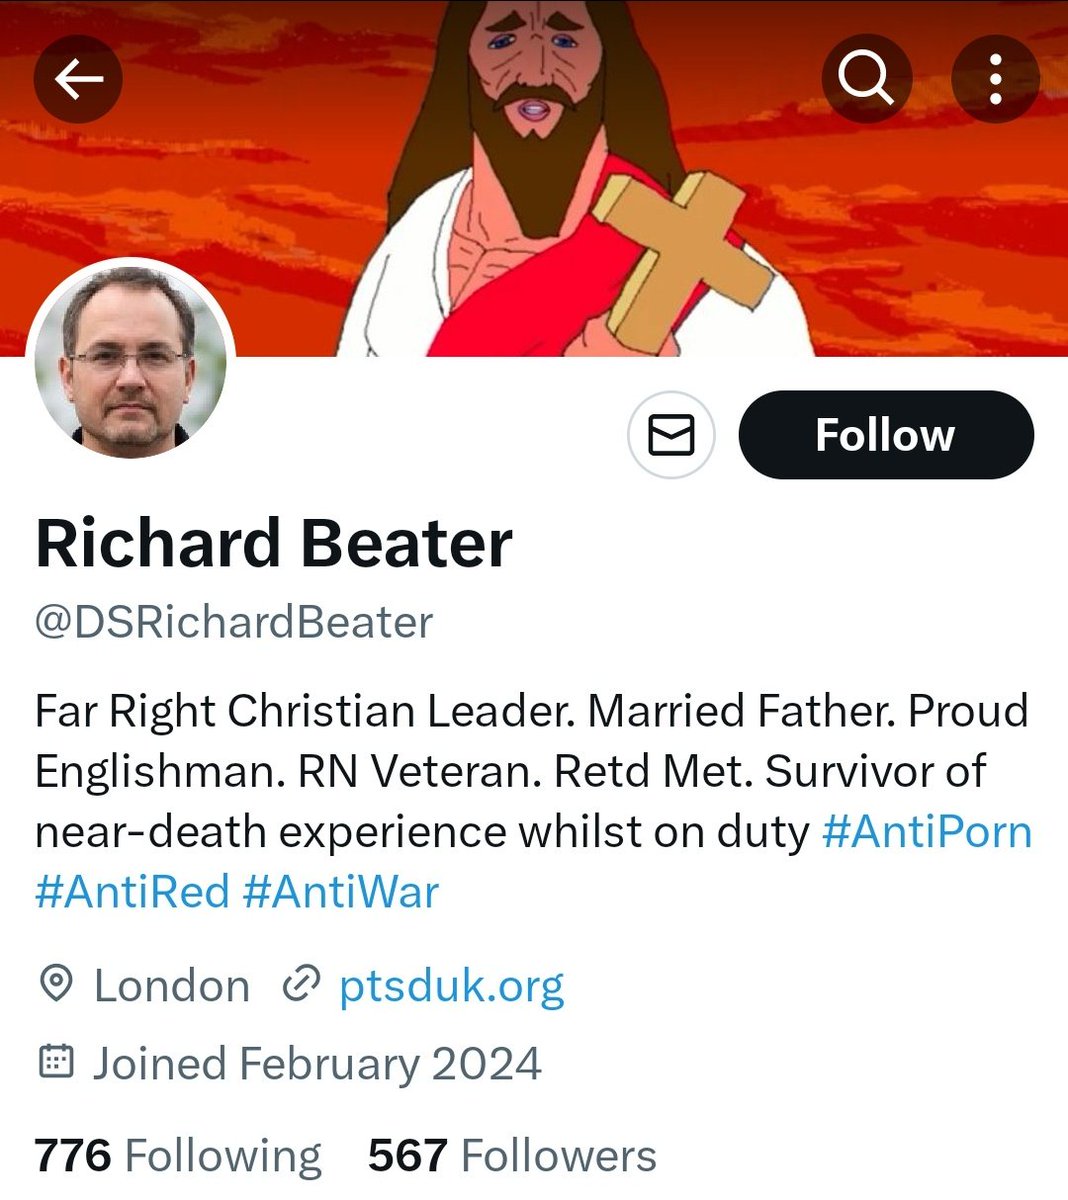 @DSRichardBeater @PastorFranklin @hopenothate Hi @hopenothate, Richard is yet another petty racist I'll advise you not to bother with.